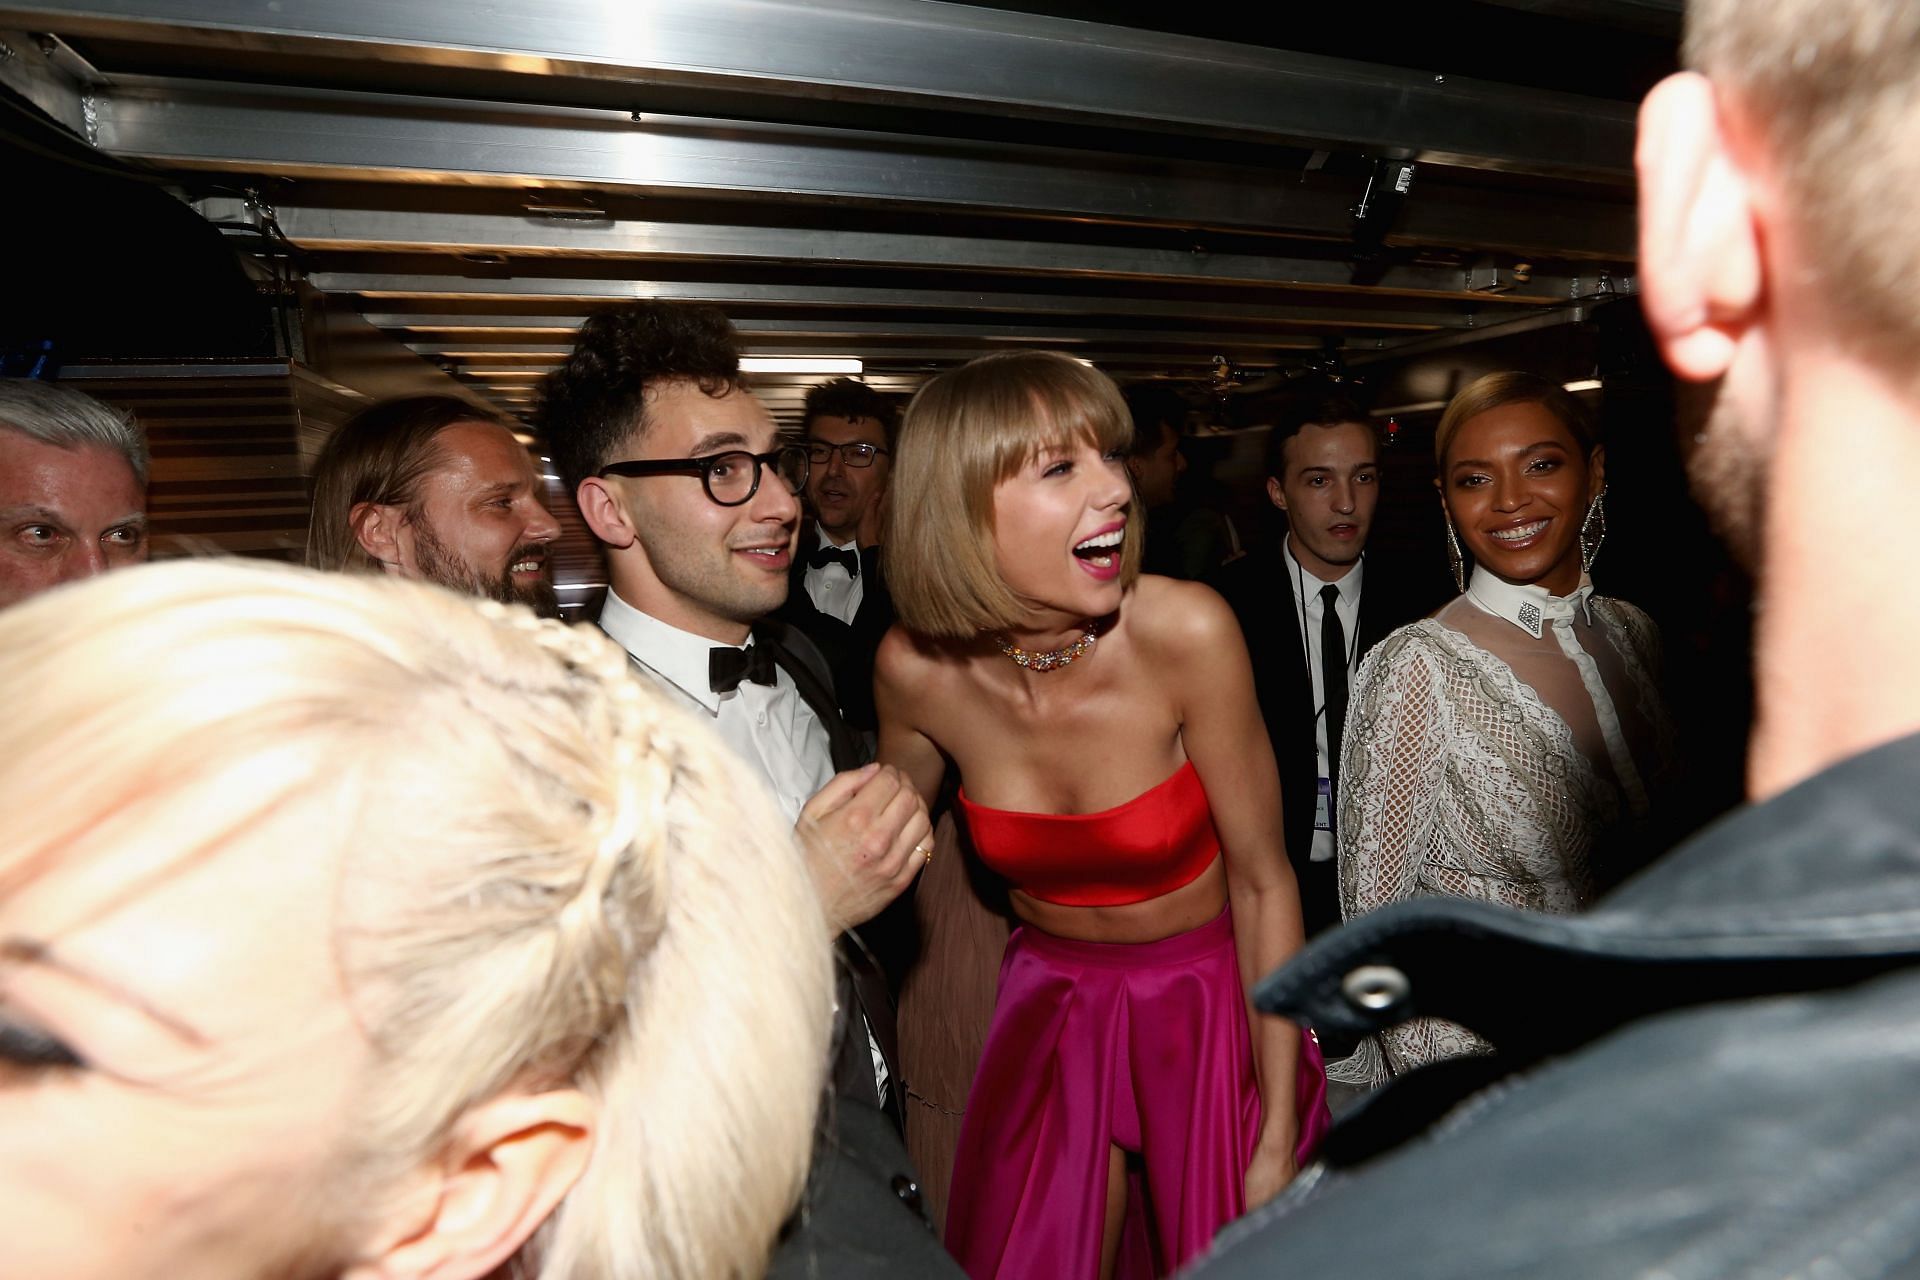 The 58th GRAMMY Awards - Backstage And Audience